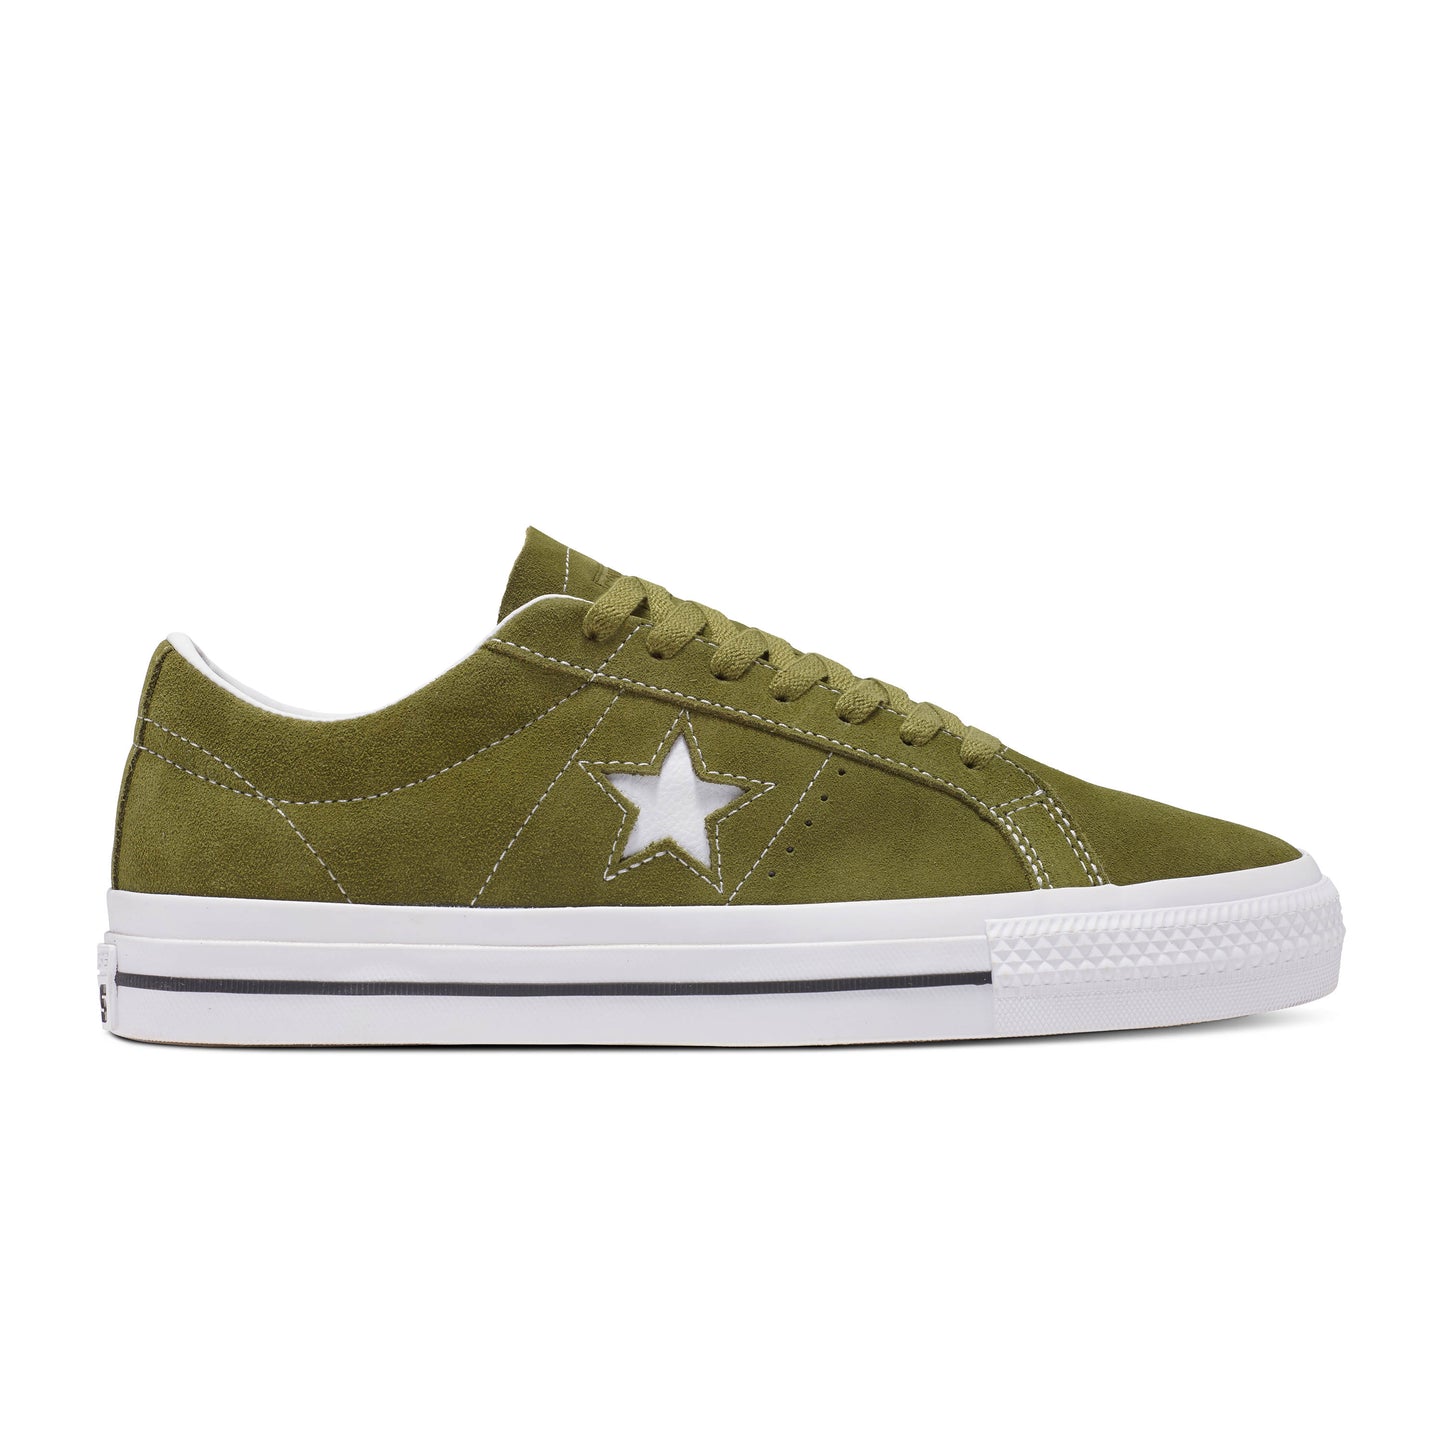 CONVERSE CONS - One Star Pro Ox Trolled/White/Black